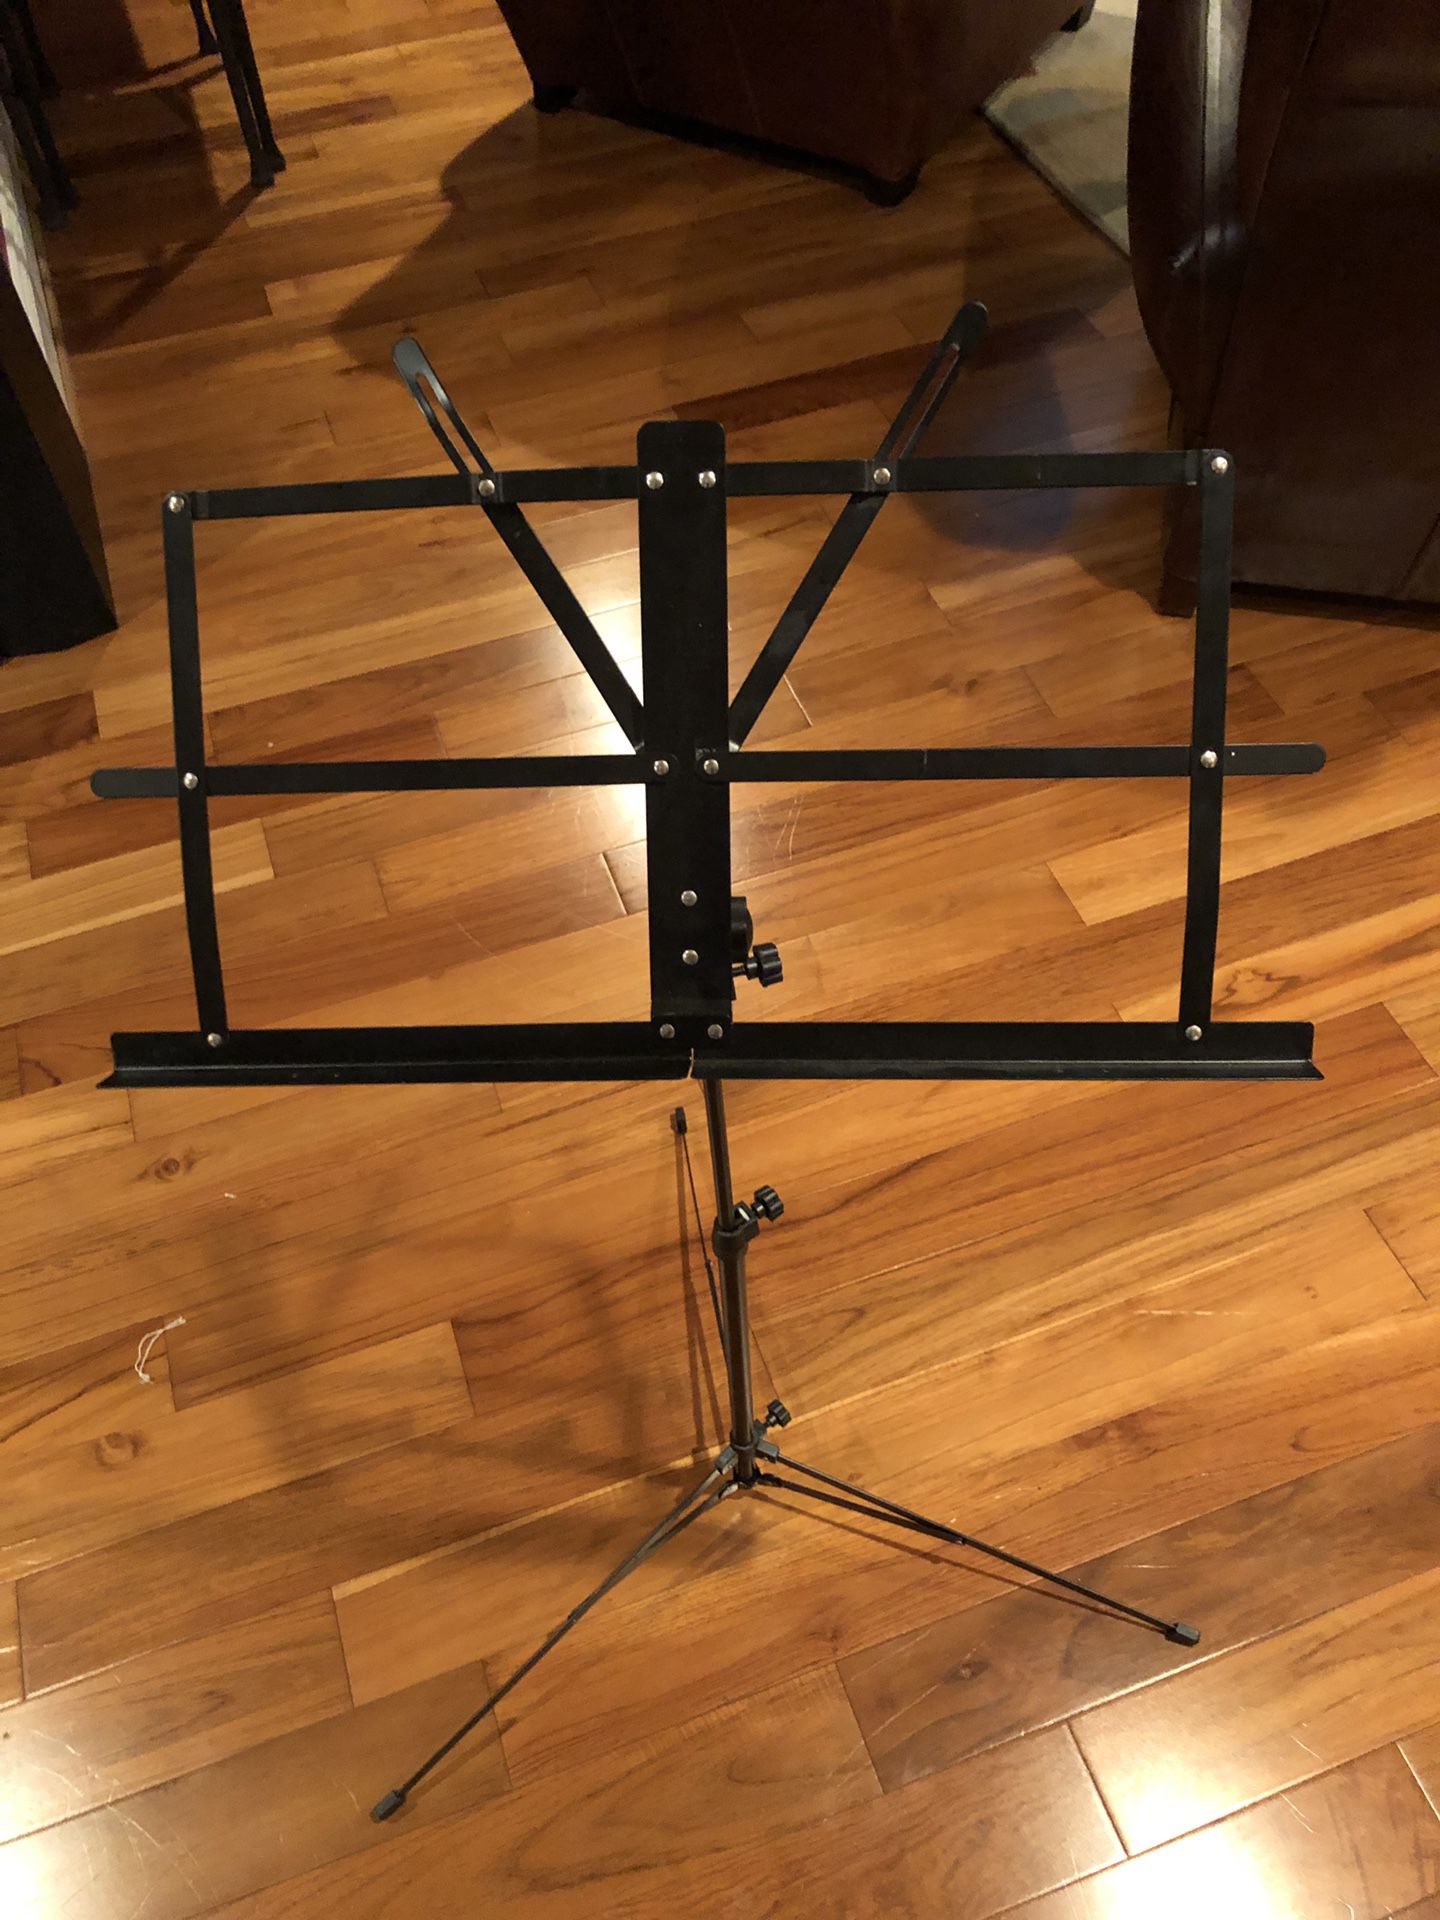 Music stand. Telescoping stand. Adjustable and collapsible. Easy to store and travel with.